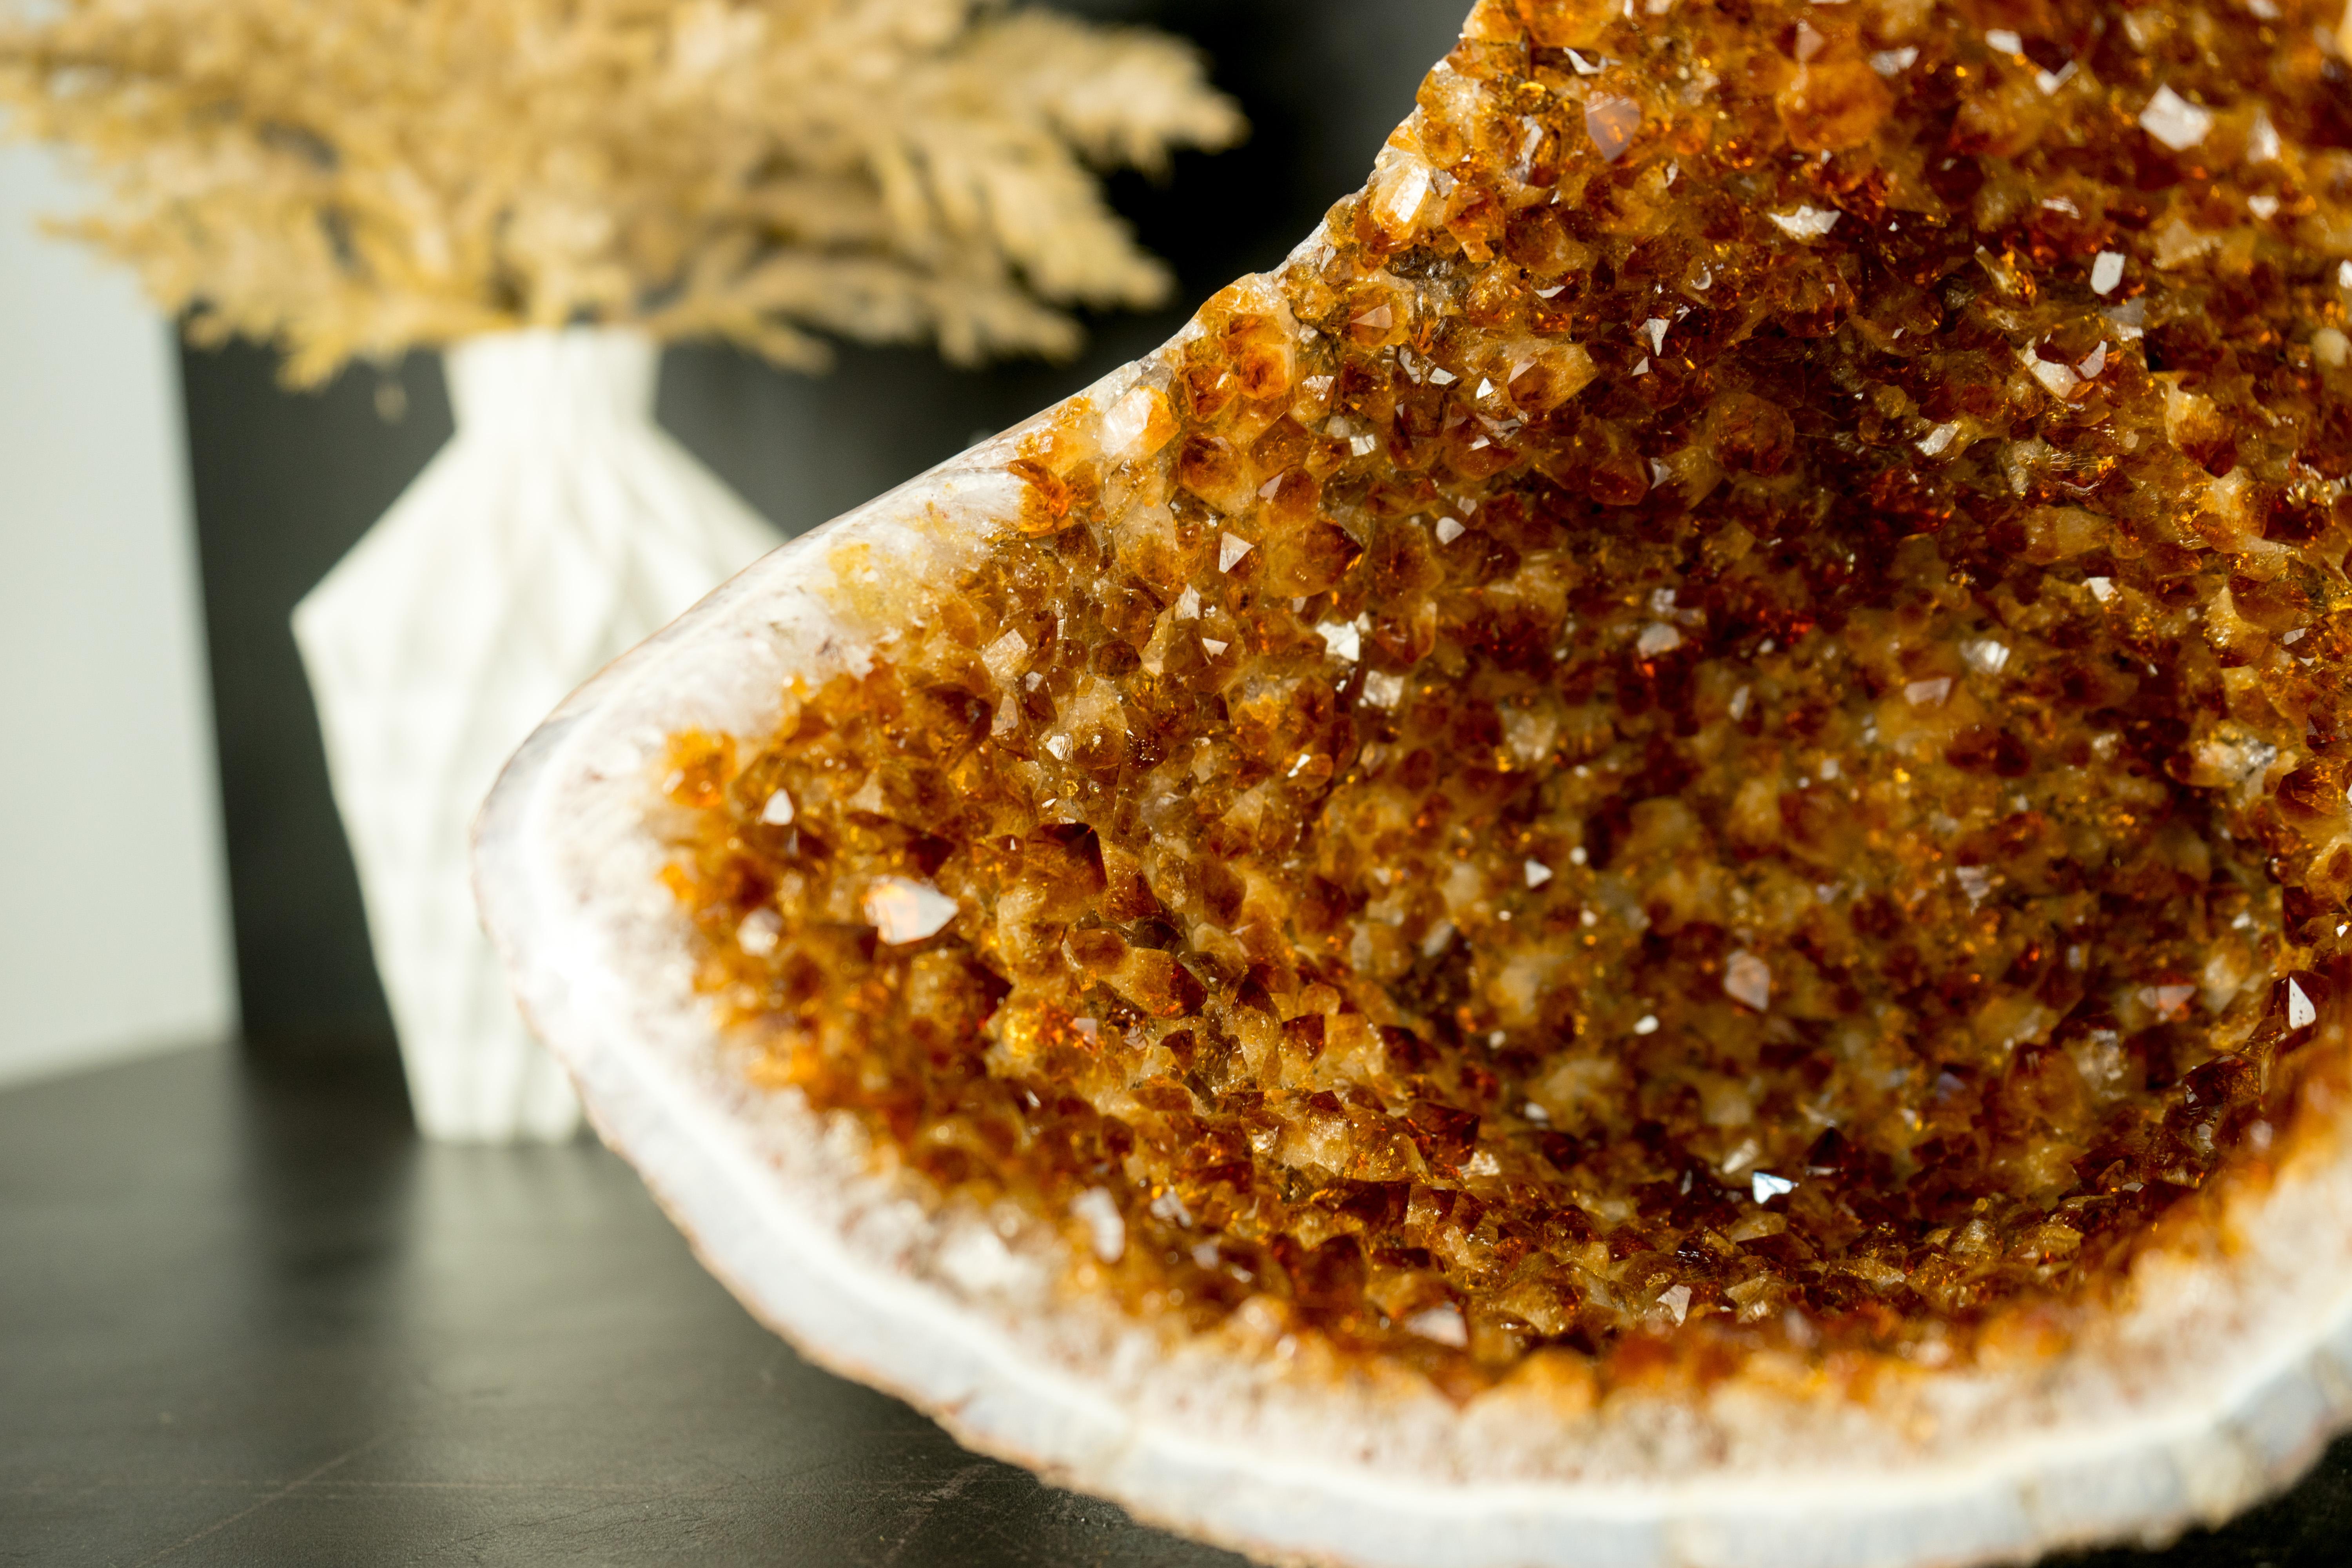 Contemporary All-Natural Citrine Geode Cave with High-Grade Golden Orange Citrine Druzy For Sale